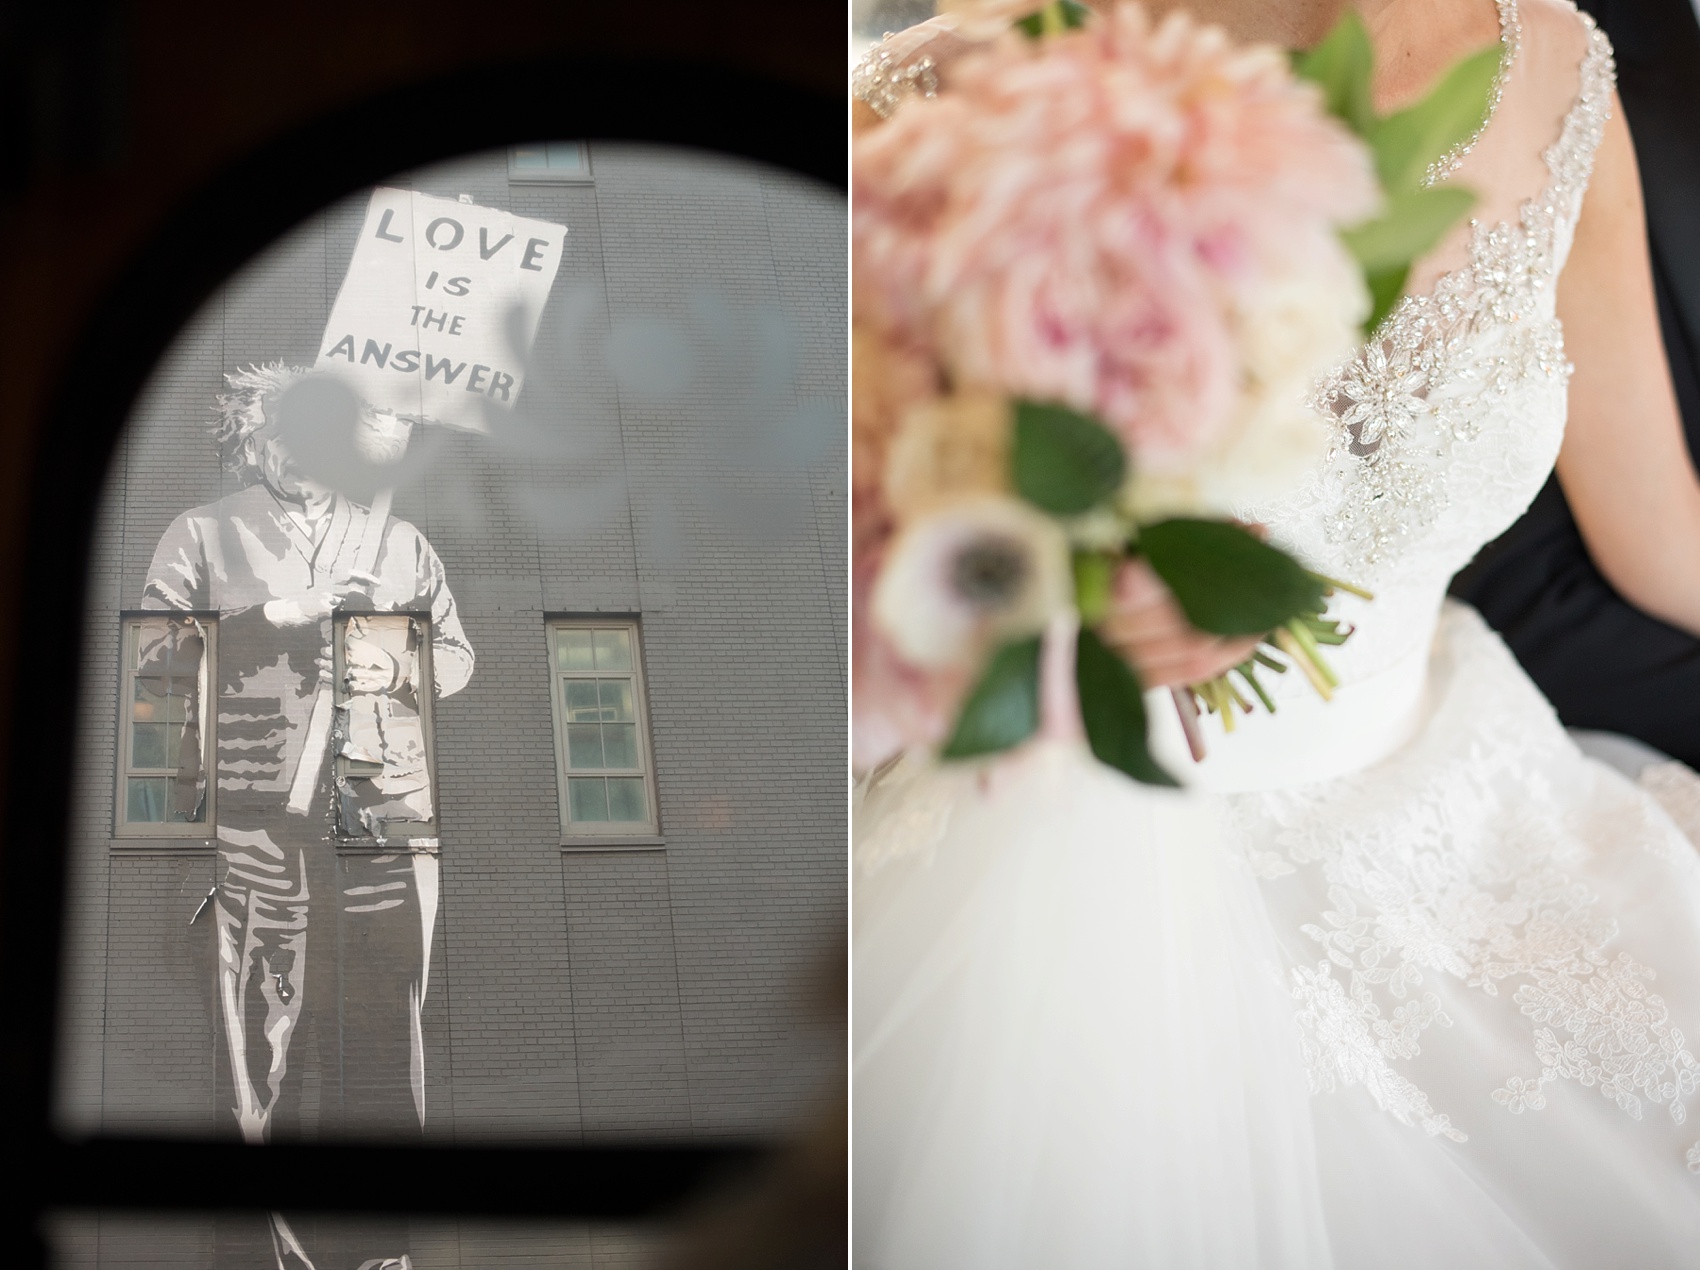 Bride and floral photos by NYC wedding photographer Mikkel Paige Photography. Flowers by Tracey Reynolds. Love is the answer graffiti in Manhattan!